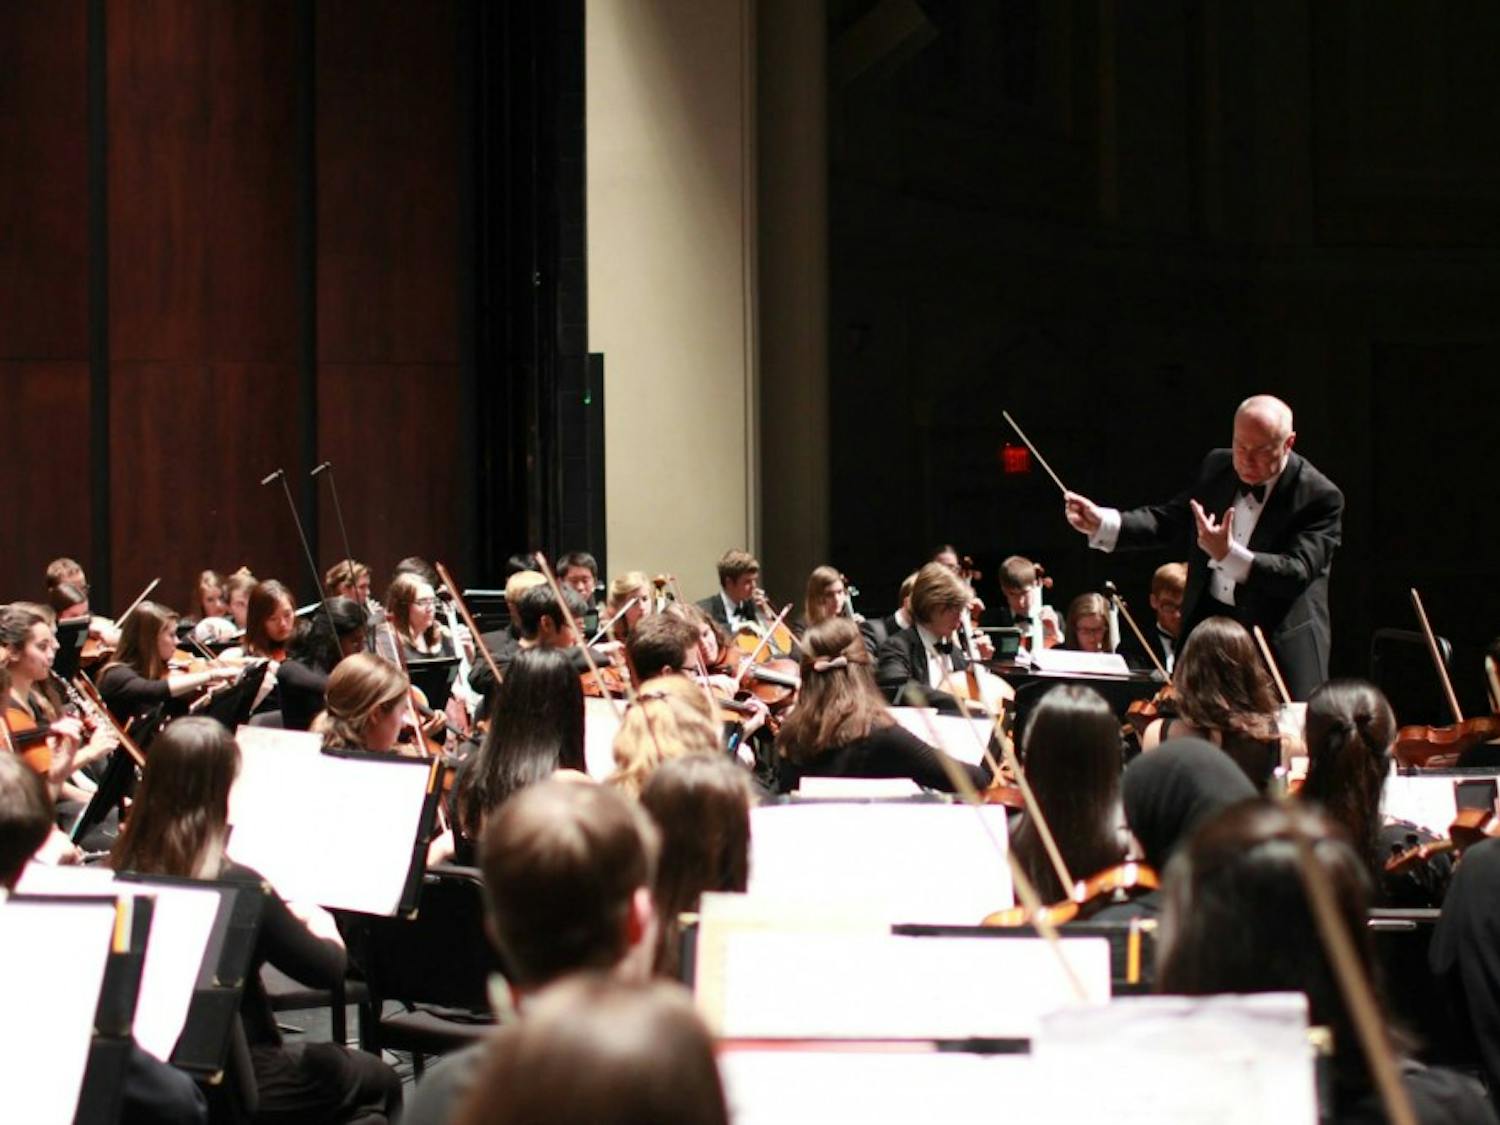 UNC professor Tõnu Kalum has served as the music director and conductor of the UNC Symphony Orchestra since 1988.

Photo Courtesy of Tõnu Kalum.